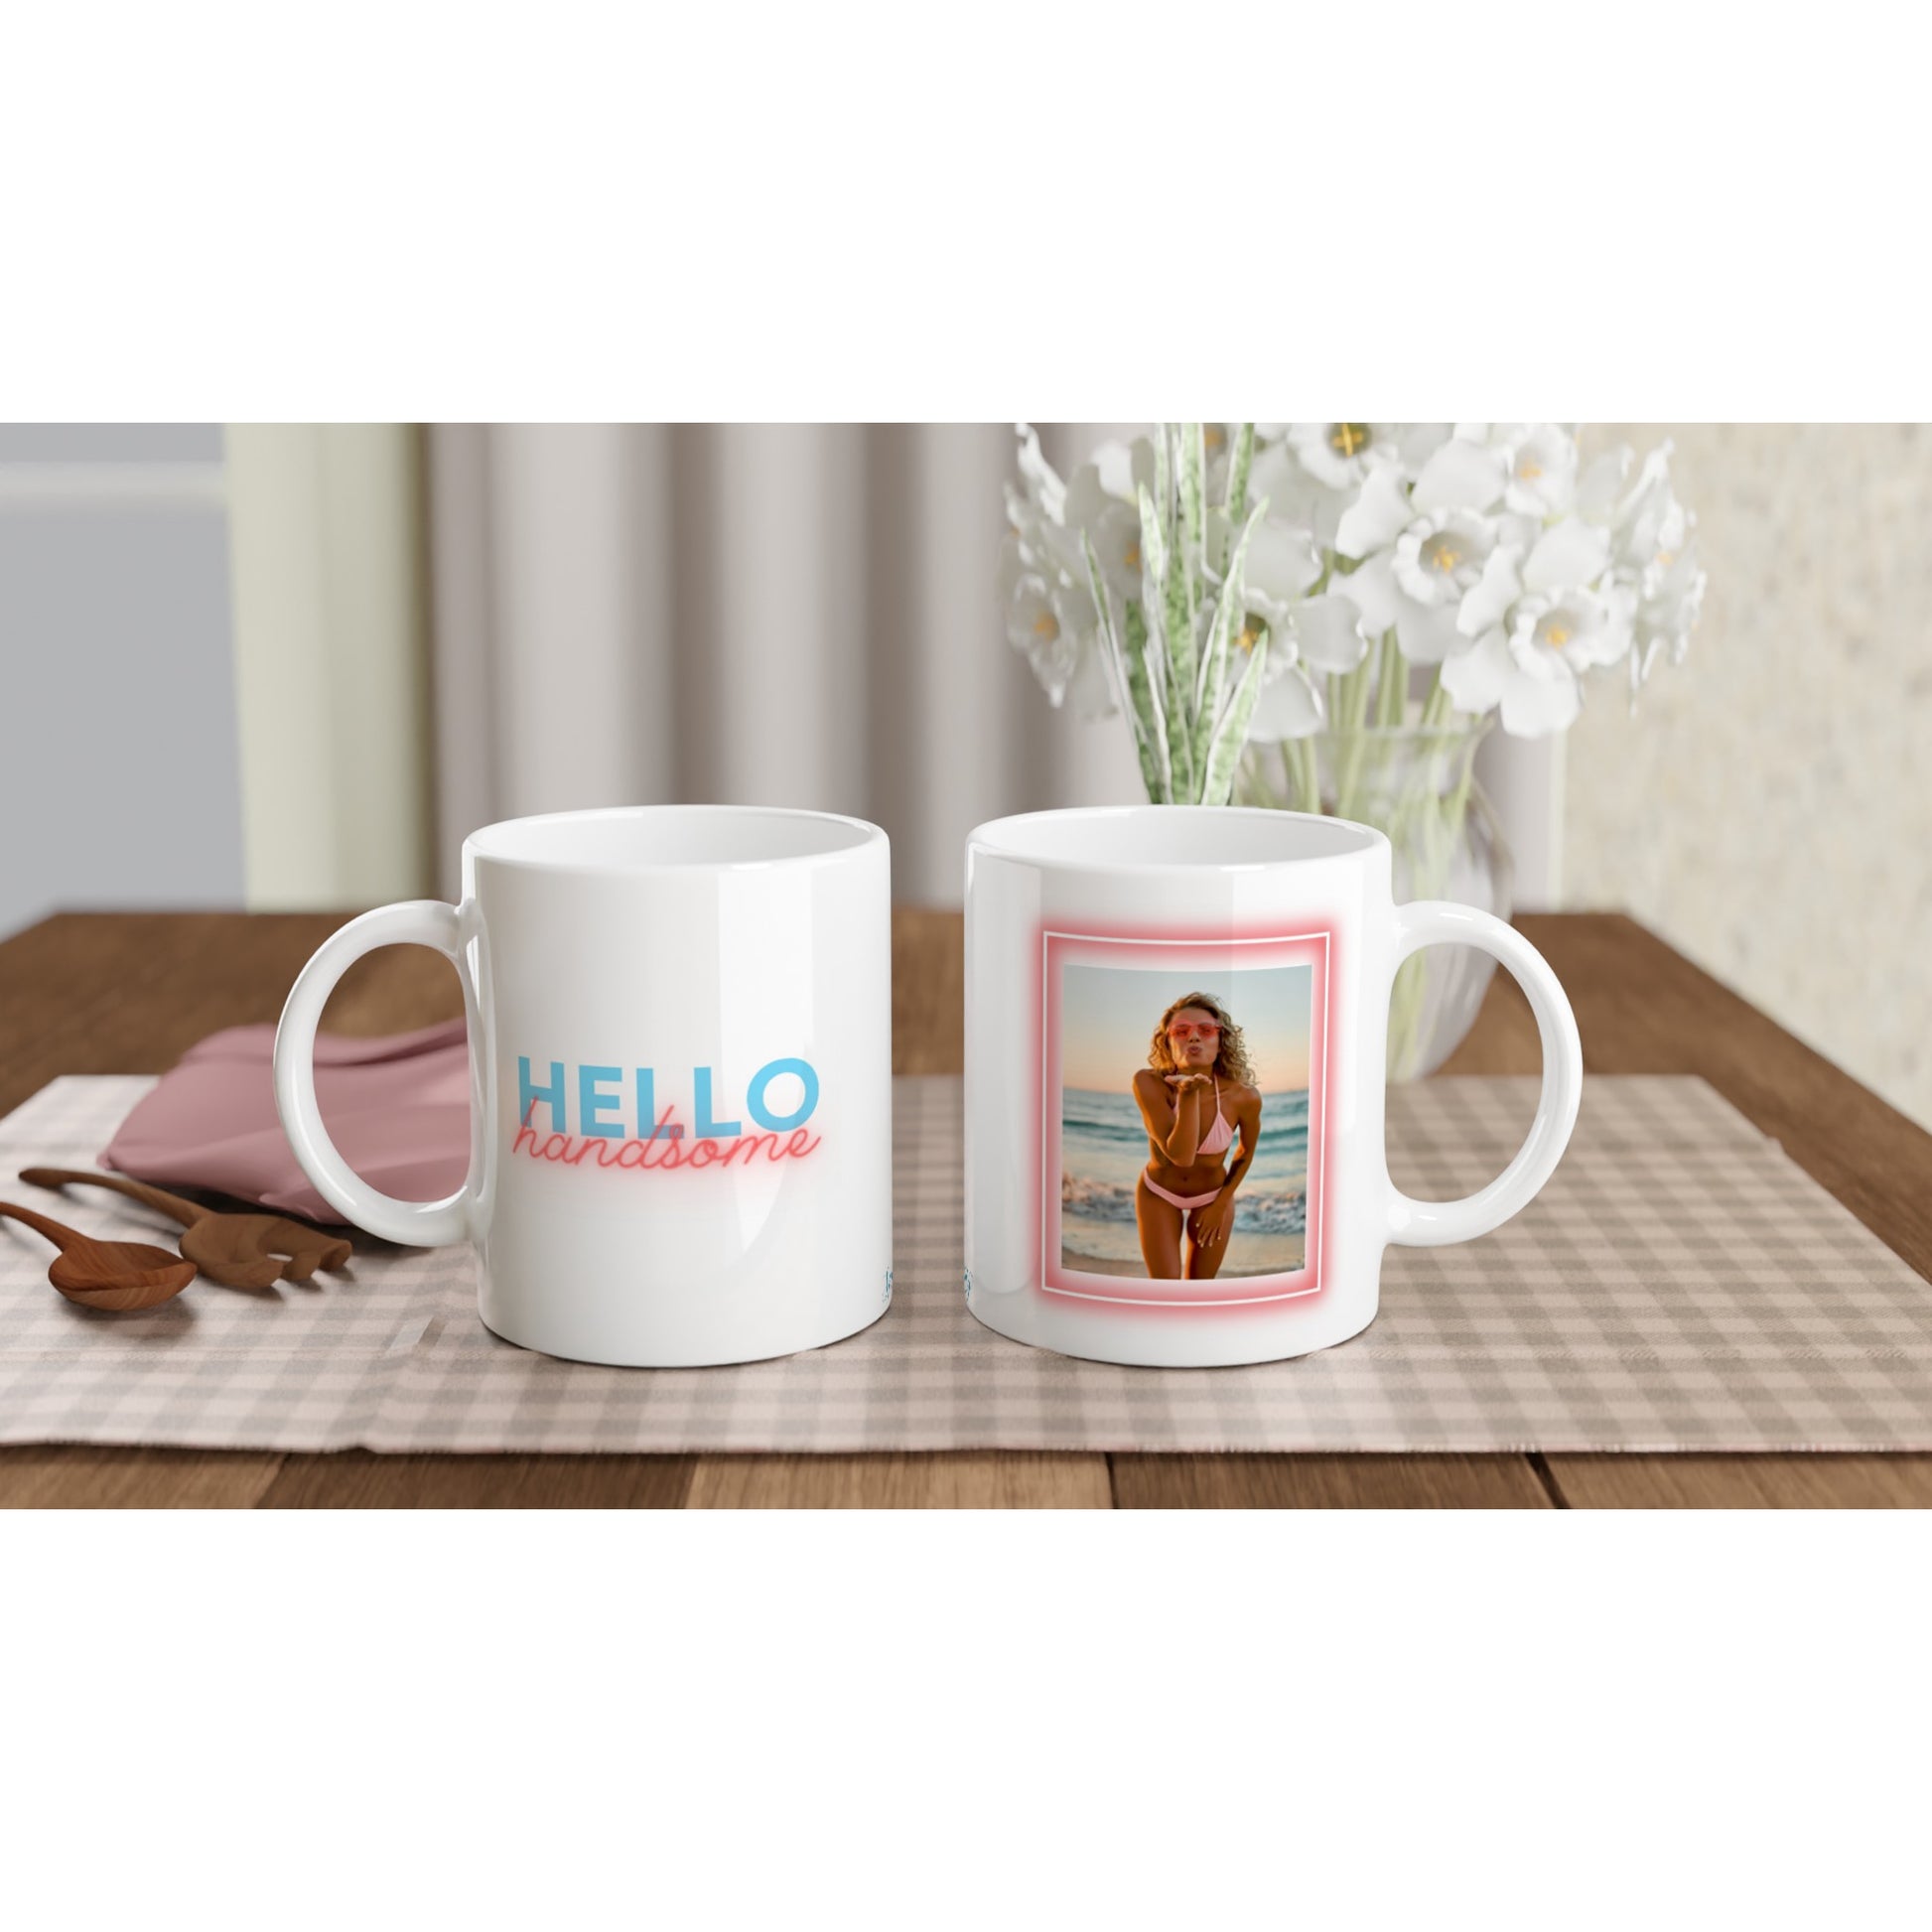 "Hello handsome" Customizable Photo 11 oz. Mug back and front on table view